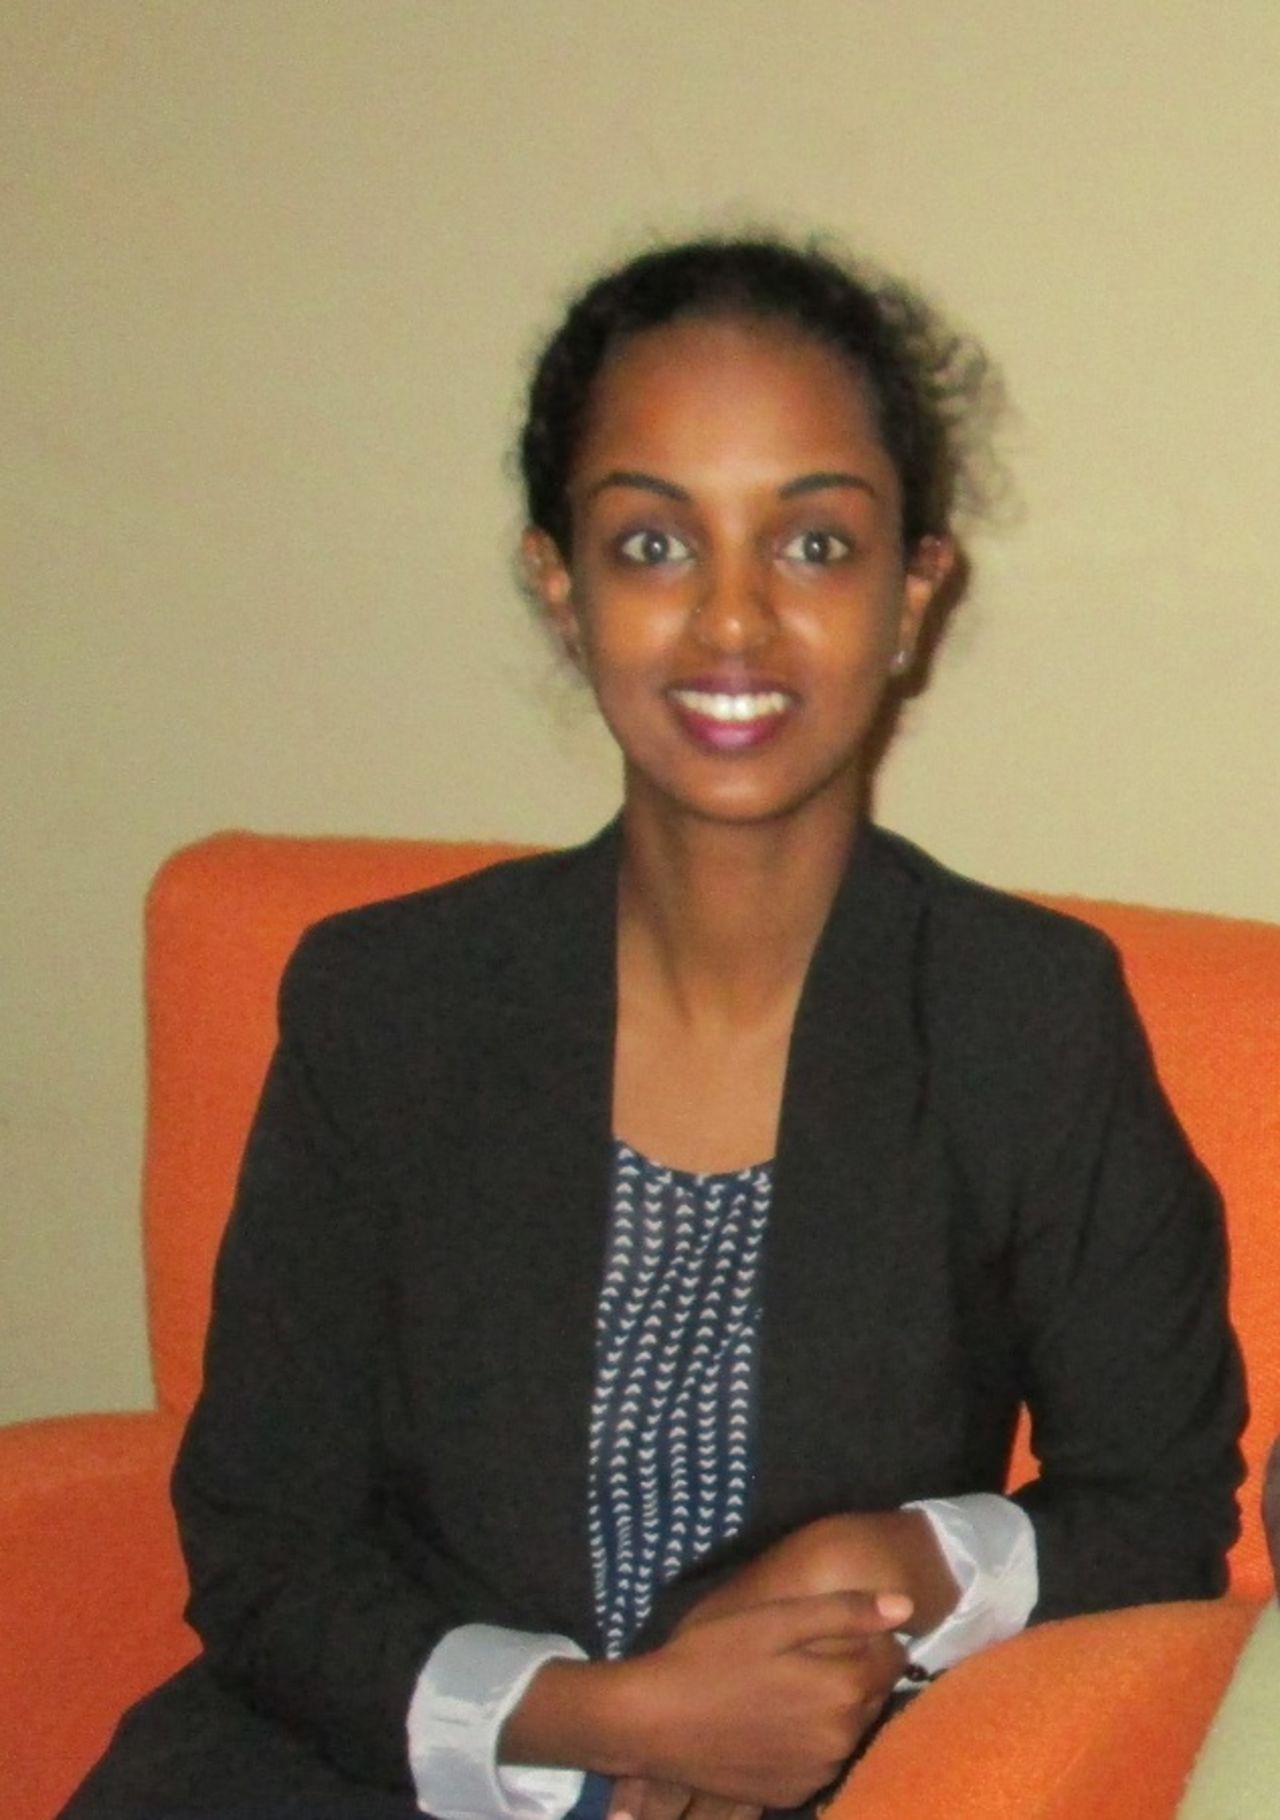 Concerned by high drop-out rates and underperformance in Ethiopia's school system, Hidaya Ibrahim founded the Qine Association for Promoting Education Quality in 2013. QAPEQ brings together government, private education institutions and students to discuss educational development.